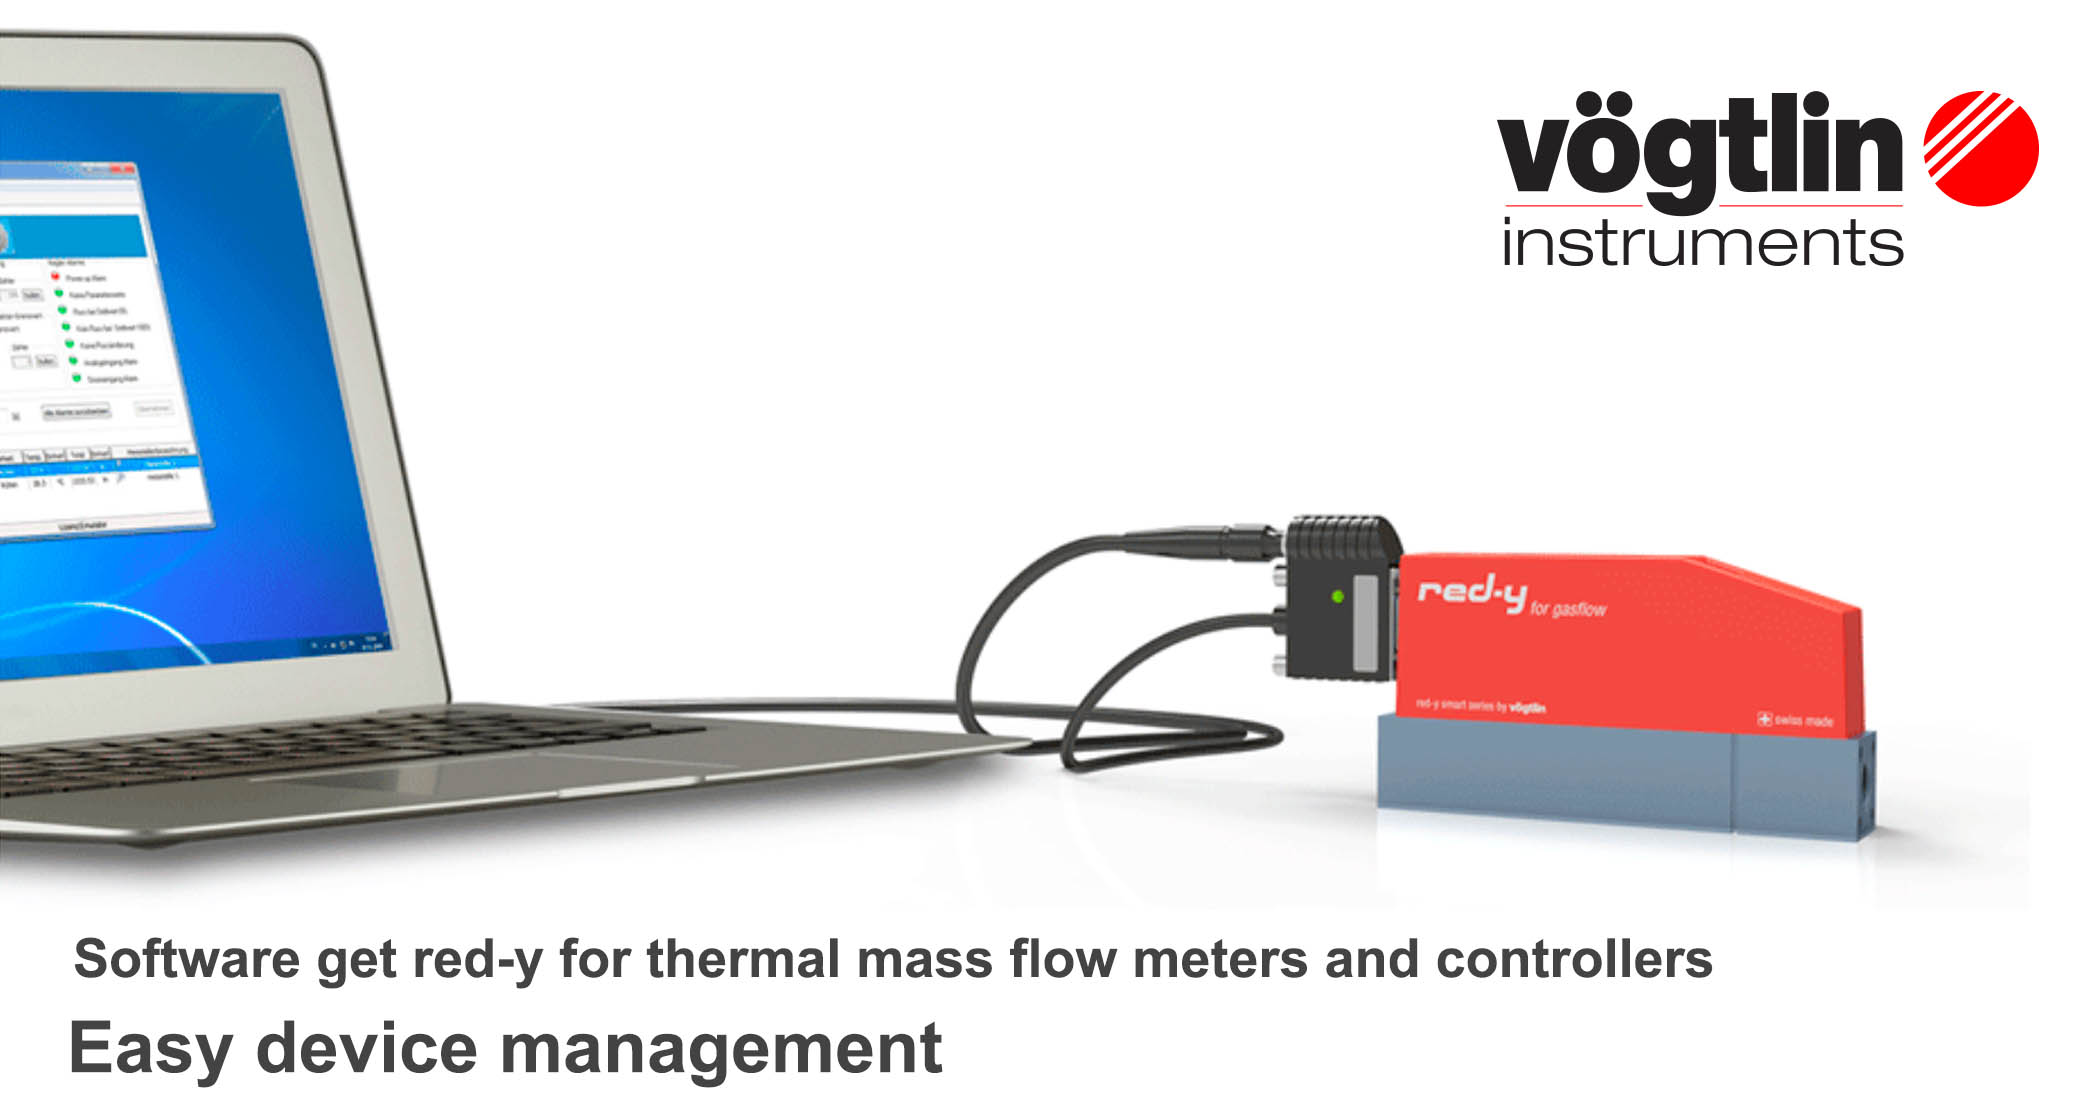 Software get red-y for thermal mass flow meters and controllers